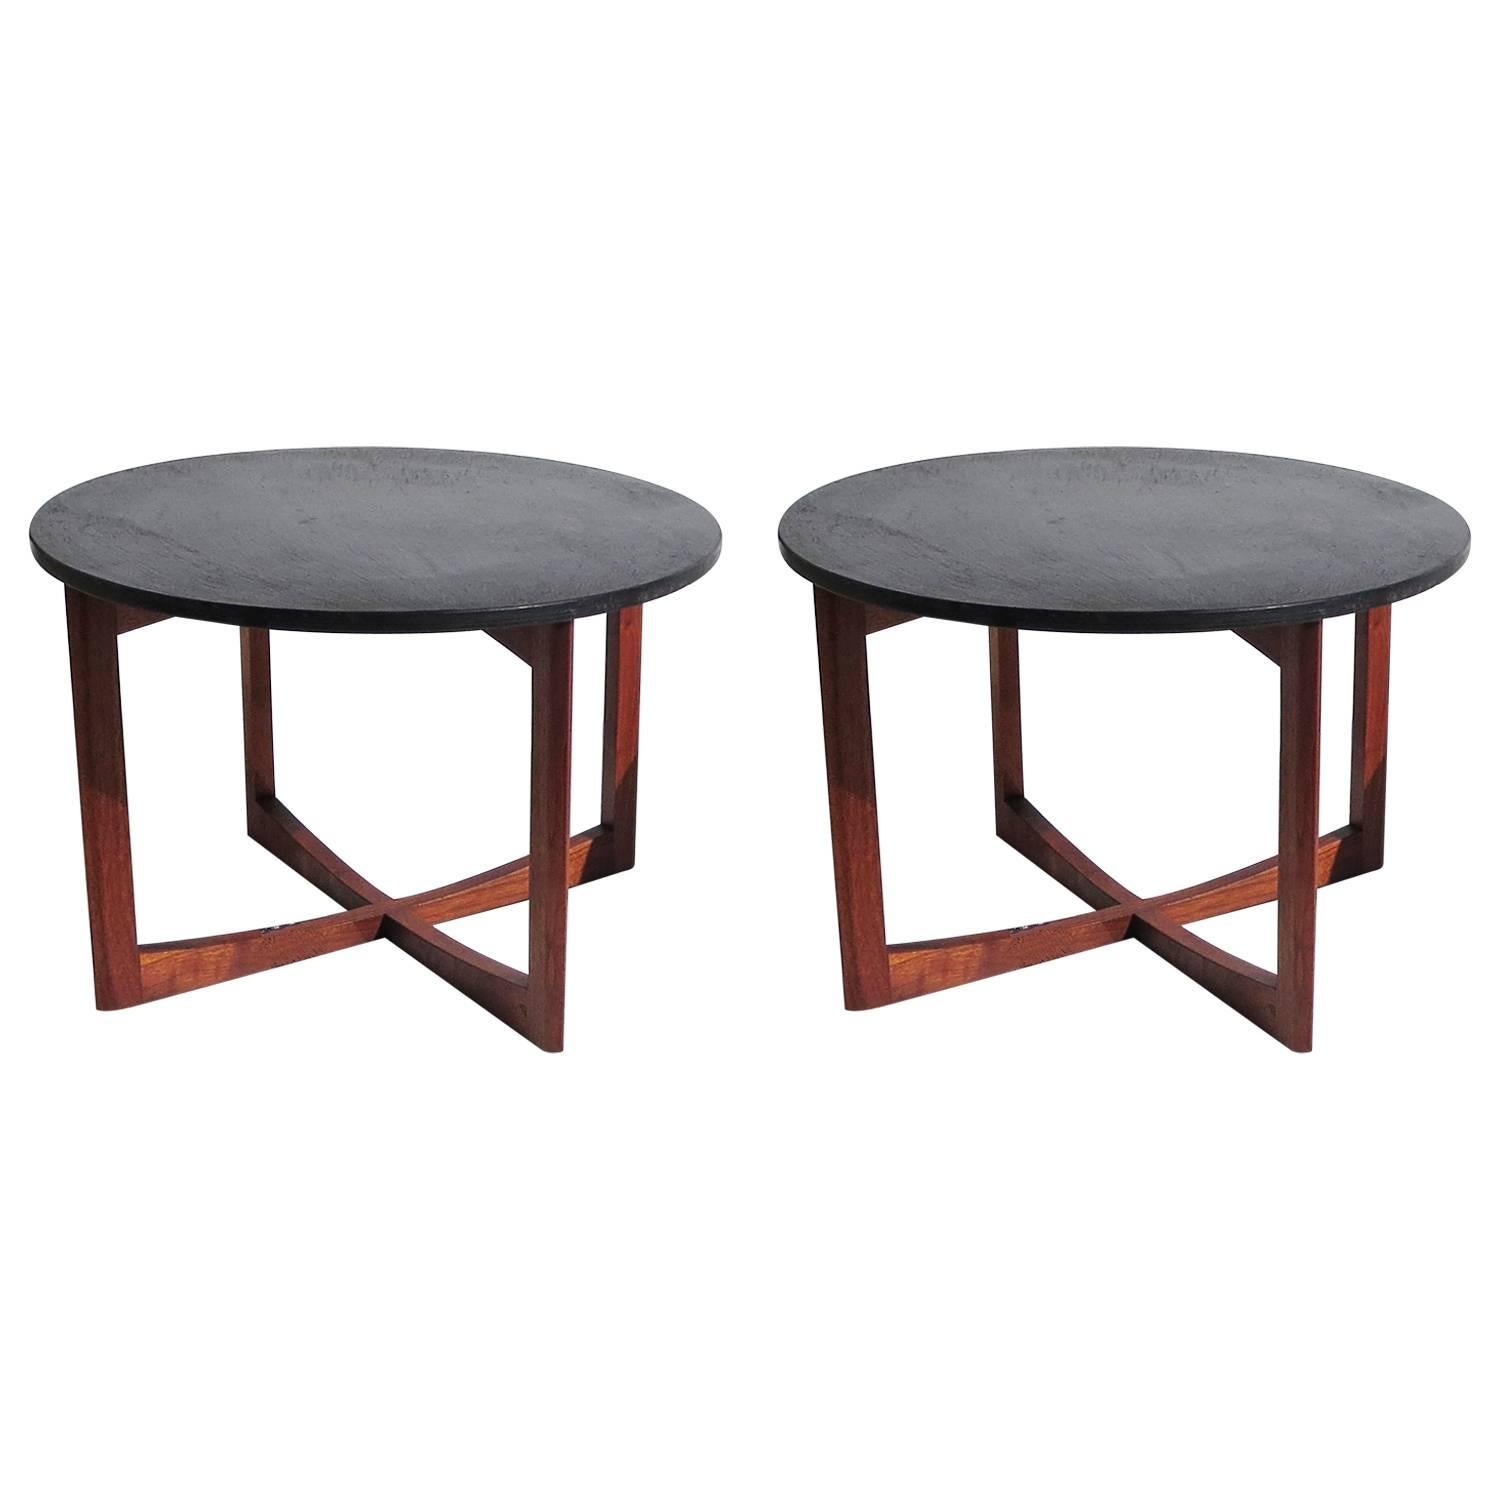 Pair of Mid-Century Side Tables in Walnut and Slate